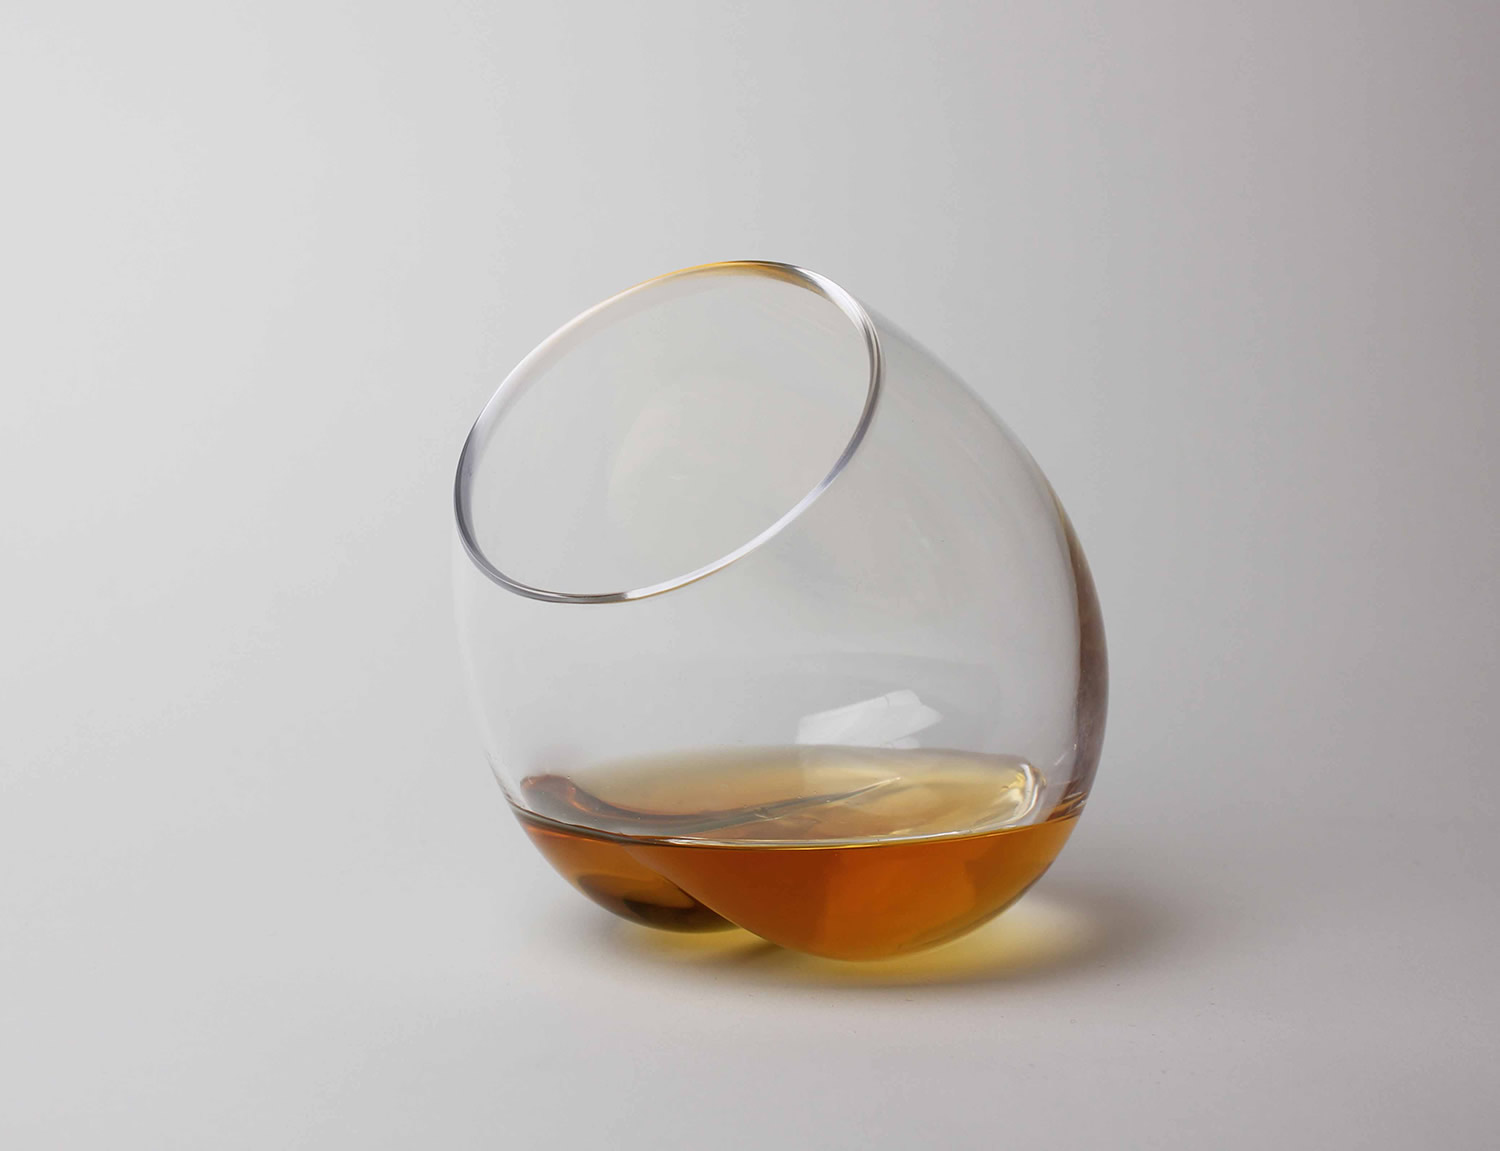 shake that glass, a bum glass for whiskey by jams stoklund